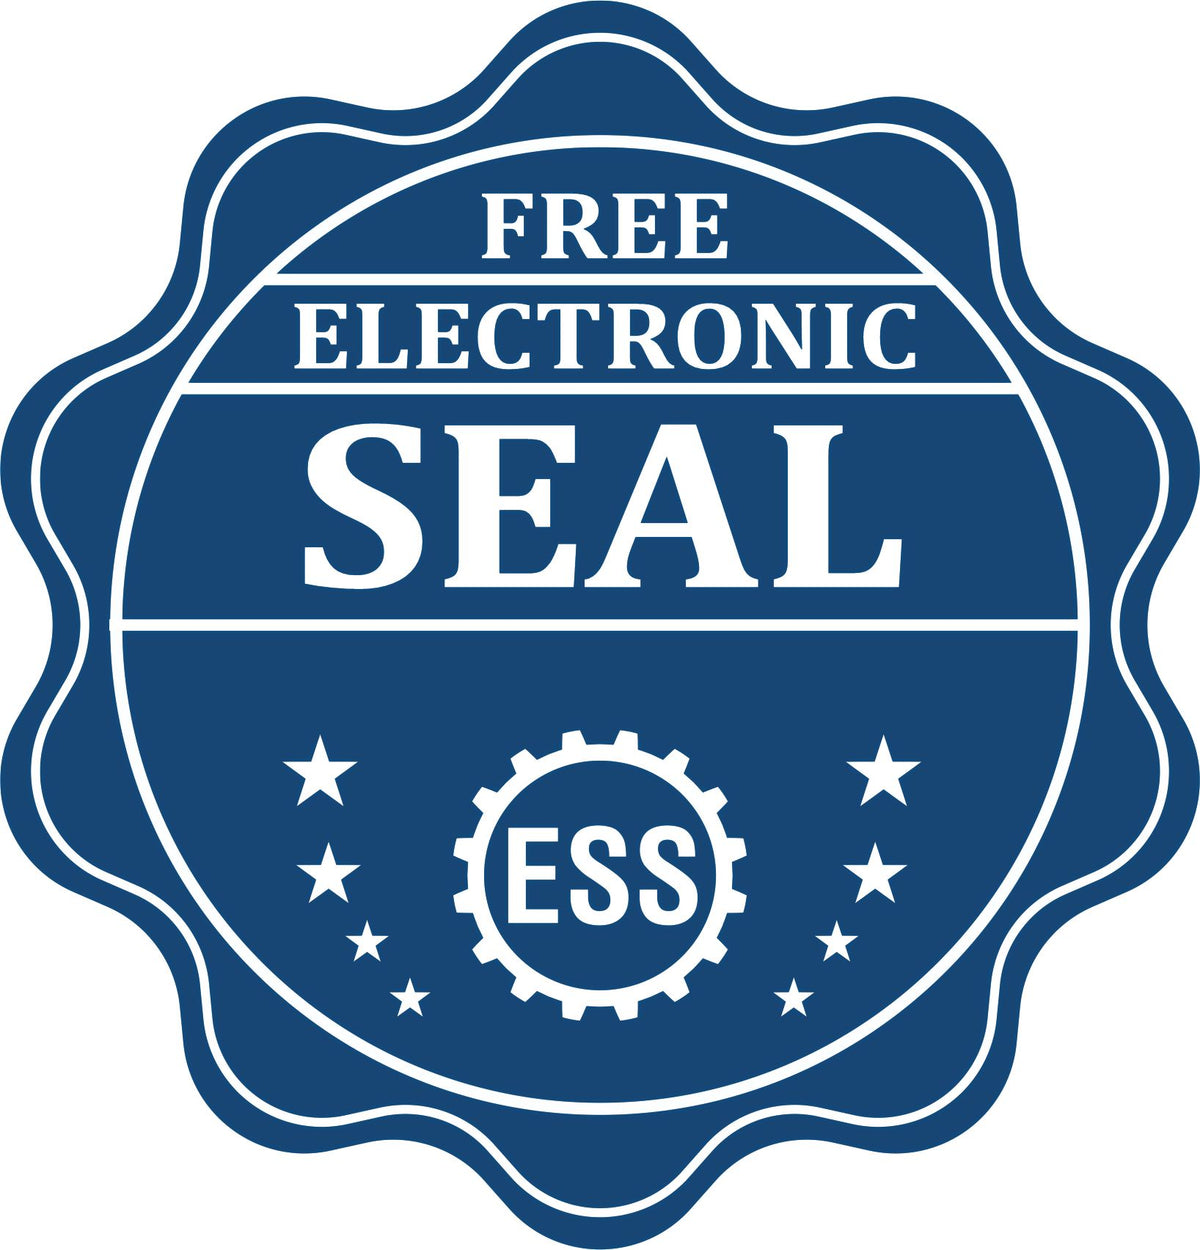 A badge showing a free electronic seal for the Slim Pre-Inked Iowa Architect Seal Stamp with stars and the ESS gear on the emblem.